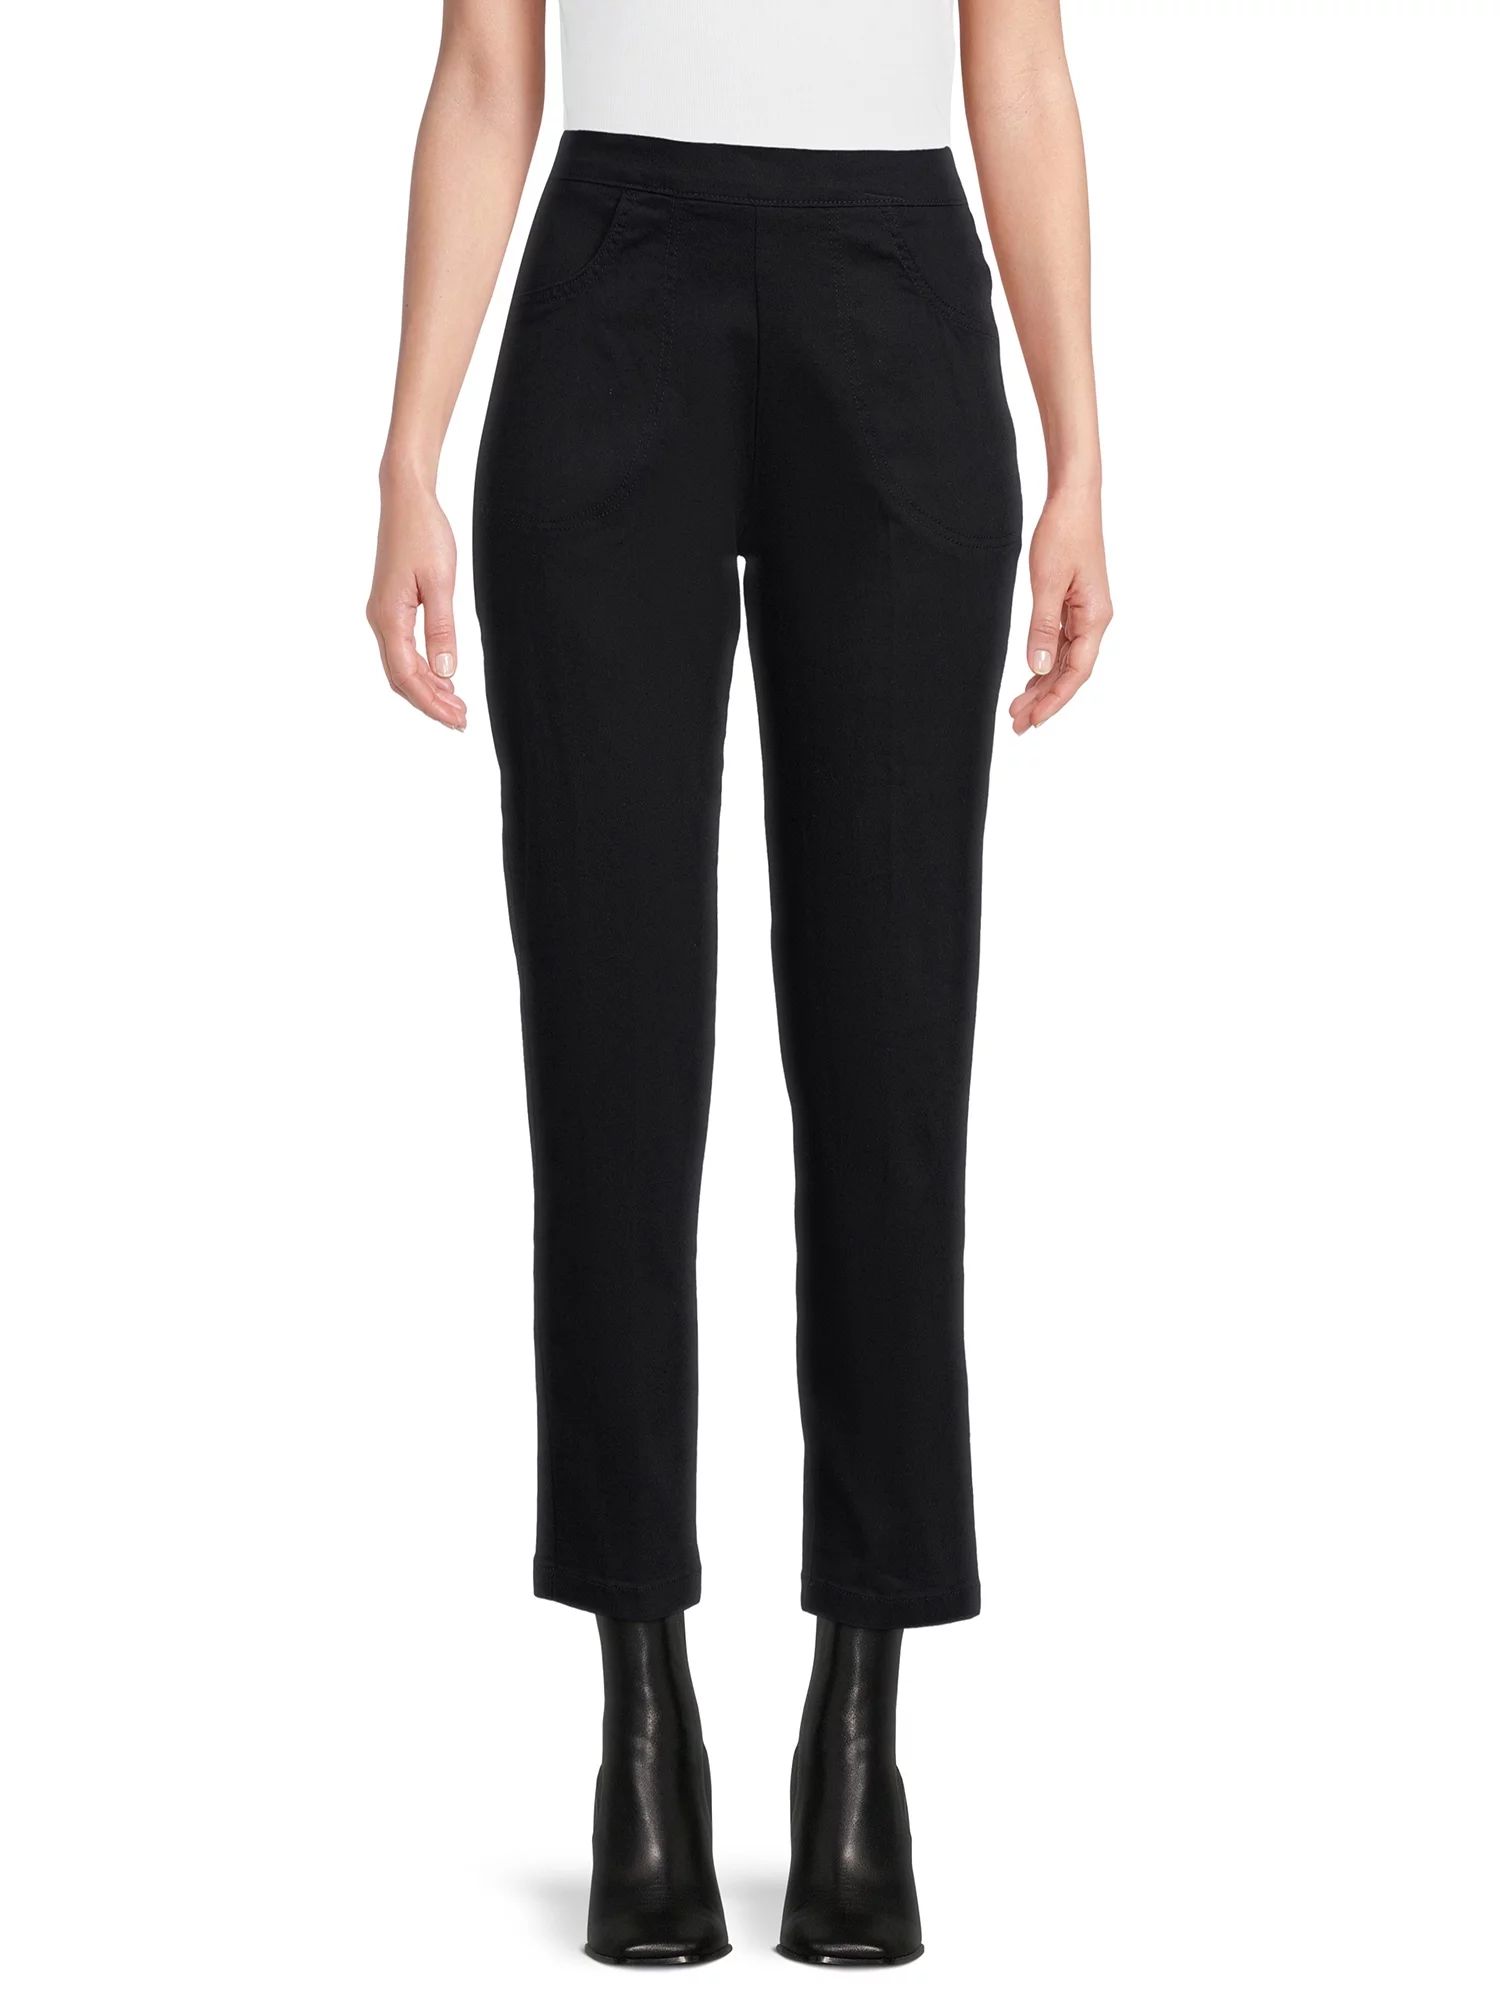 RealSize Women's Stretch Pull On Pants with Pockets, 29" Inseam for Regular, Sizes XS-XXL | Walmart (US)